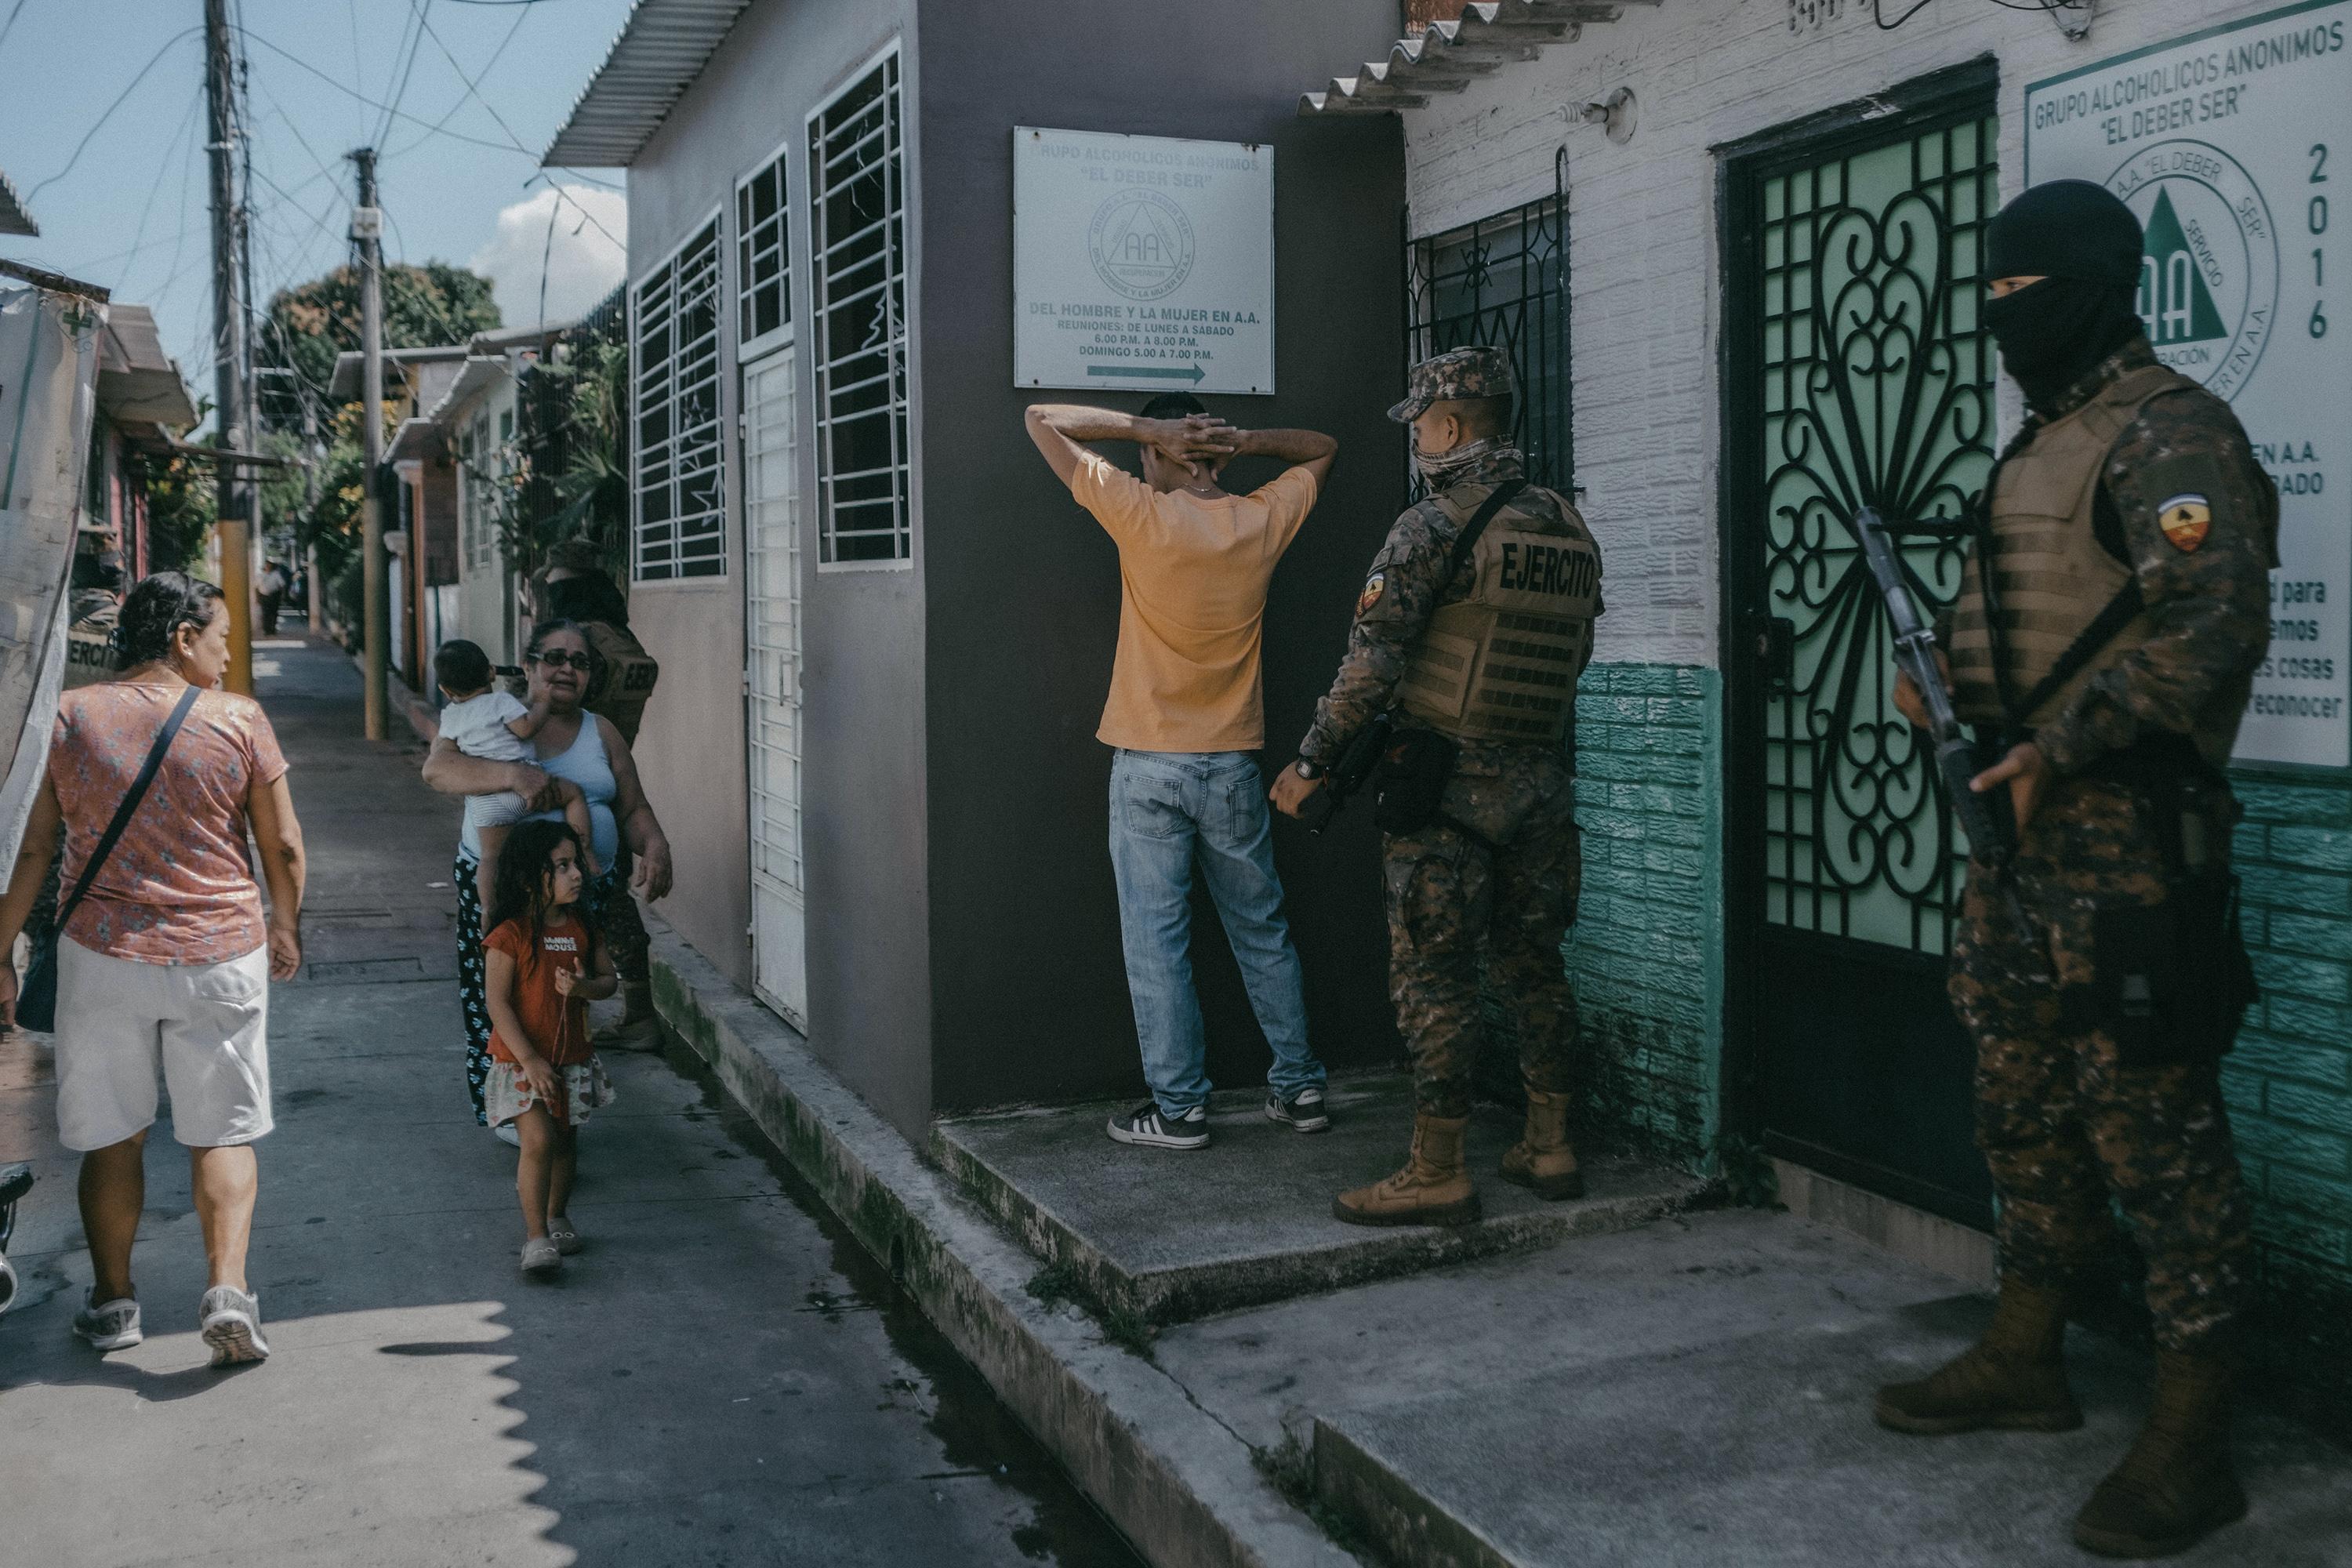 On December 3, 2022, during the state of exception, the Bukele administration mobilized a military siege of Soyapango, a satellite city of San Salvador. In neighborhoods like Las Margaritas, the Armed Forces carried out home-to-home raids, detaining anyone they deemed suspicious. Photo: Carlos Barrera/El Faro